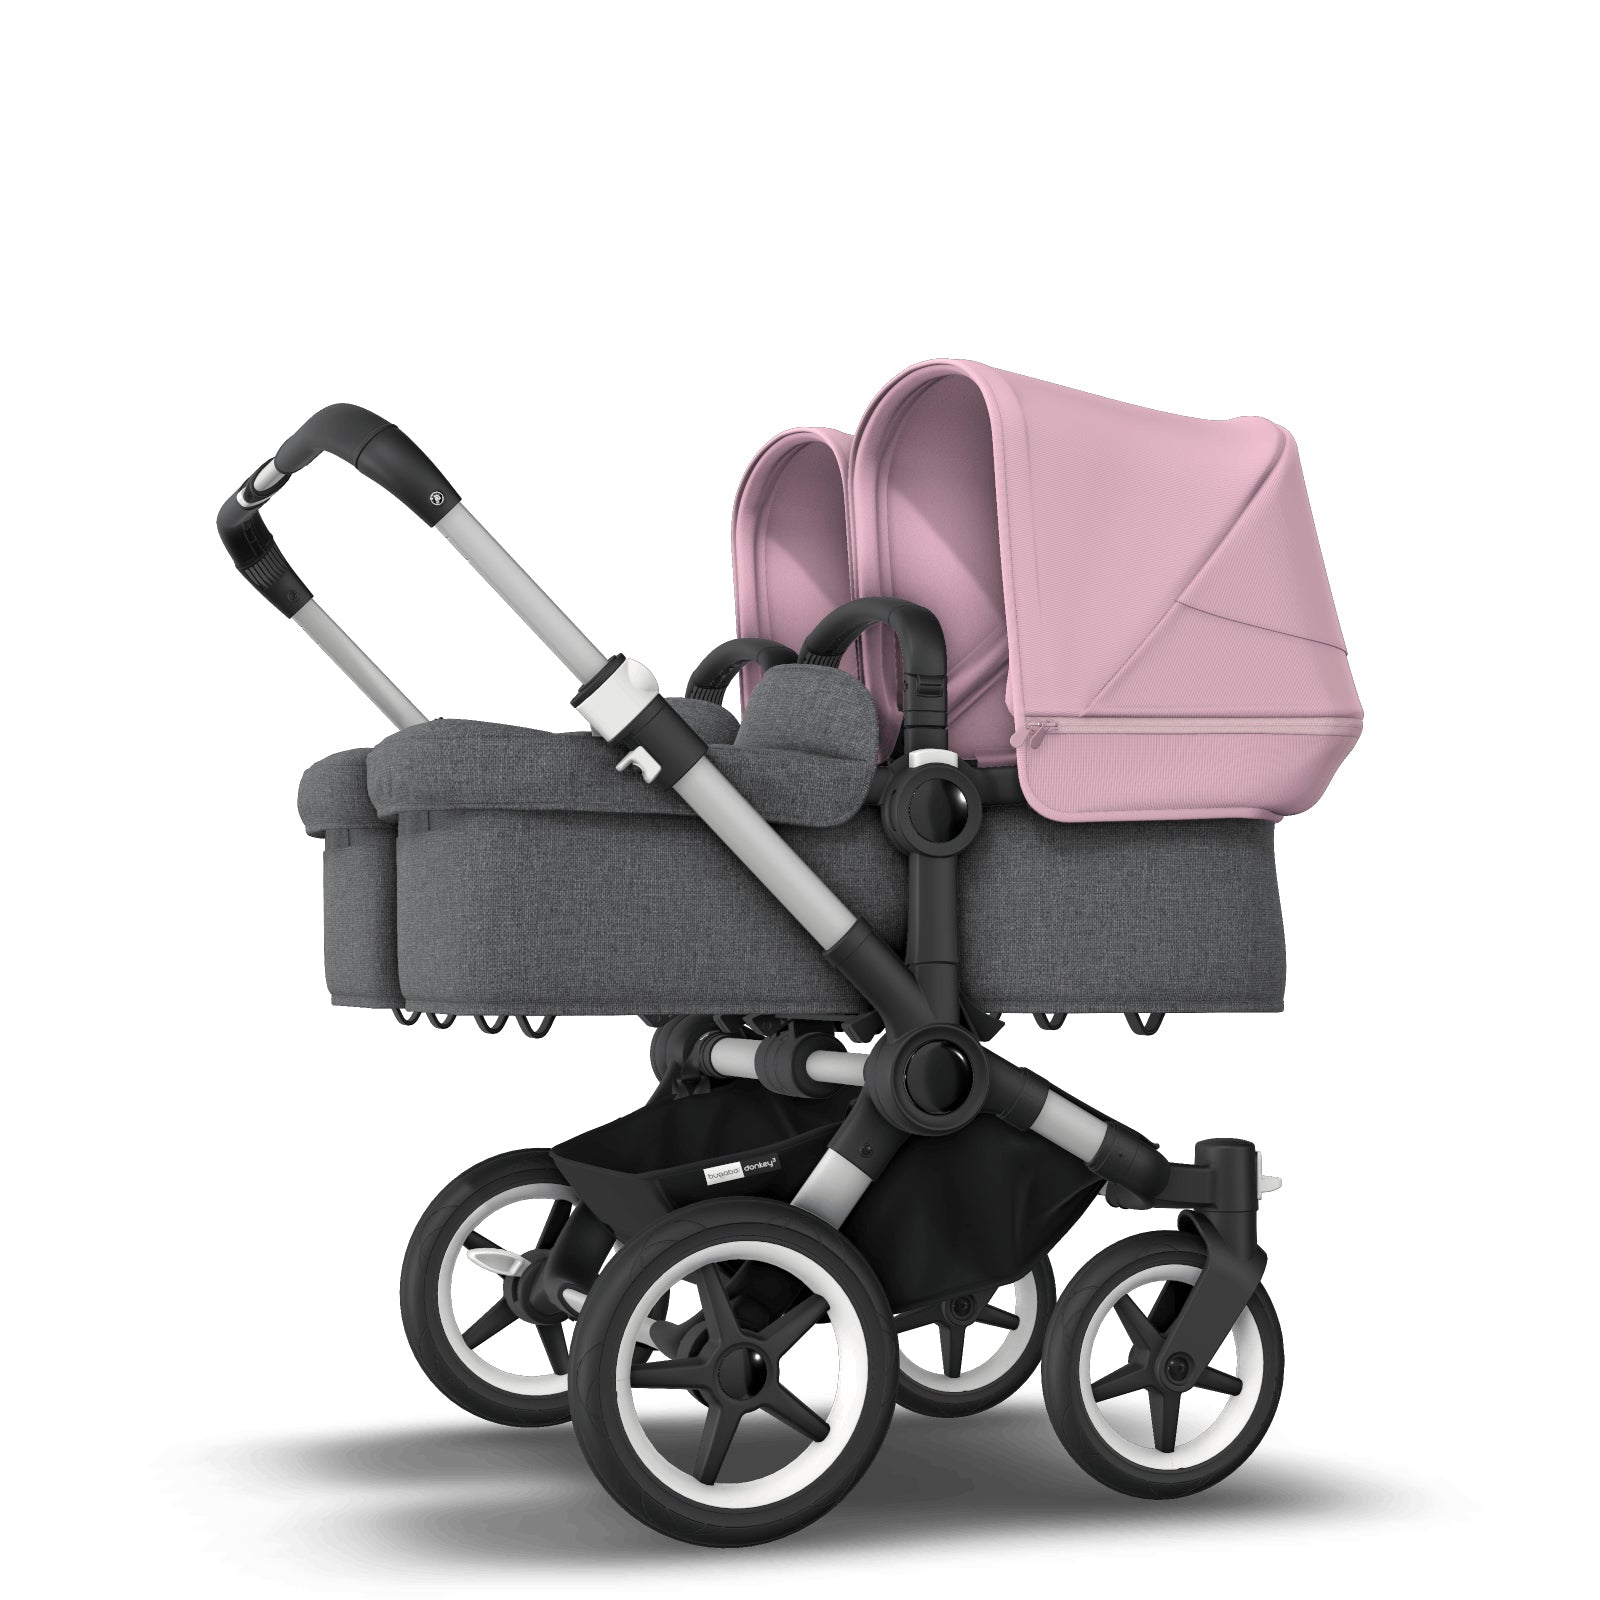 Bugaboo Donkey 3 Twin Seat and Carrycot Pushchair - Soft Pink